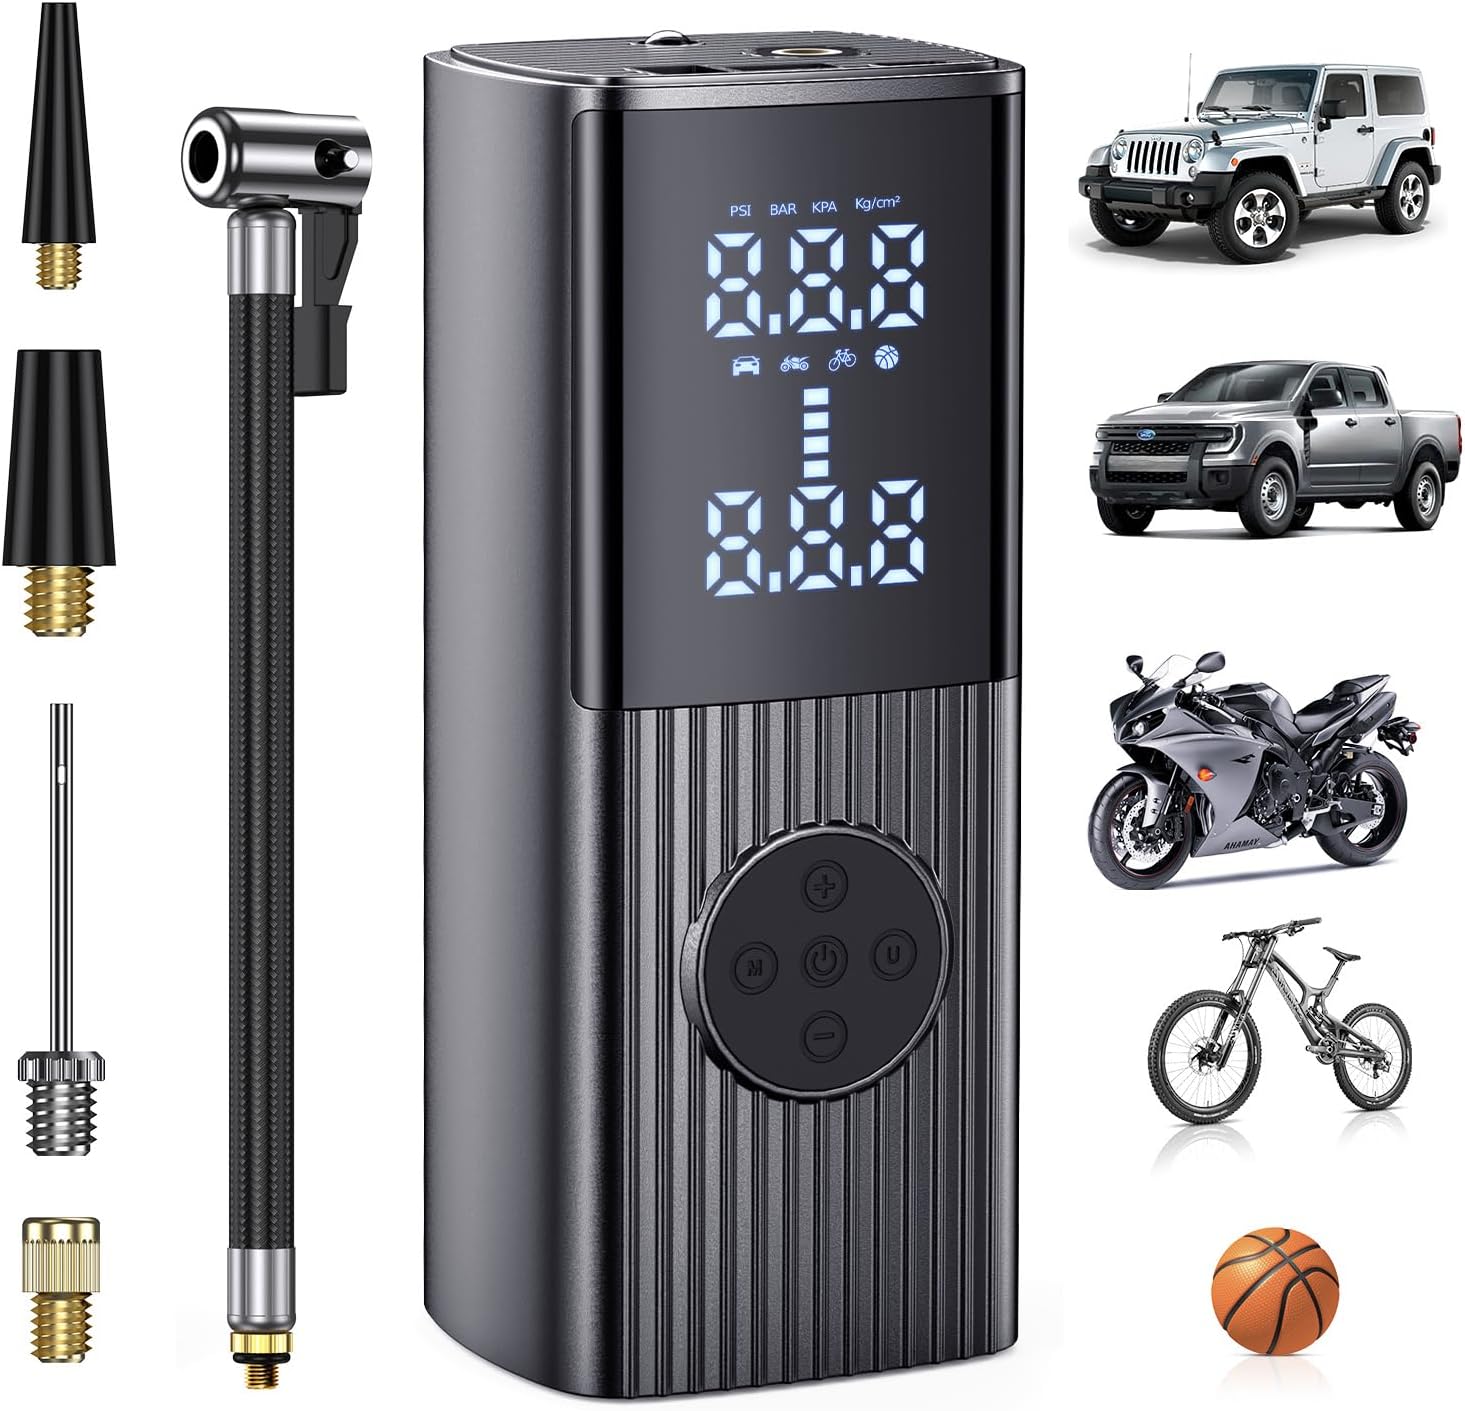 Portable Air Compressor Tire Inflator - Powerful Car Accessory with Digital Screen